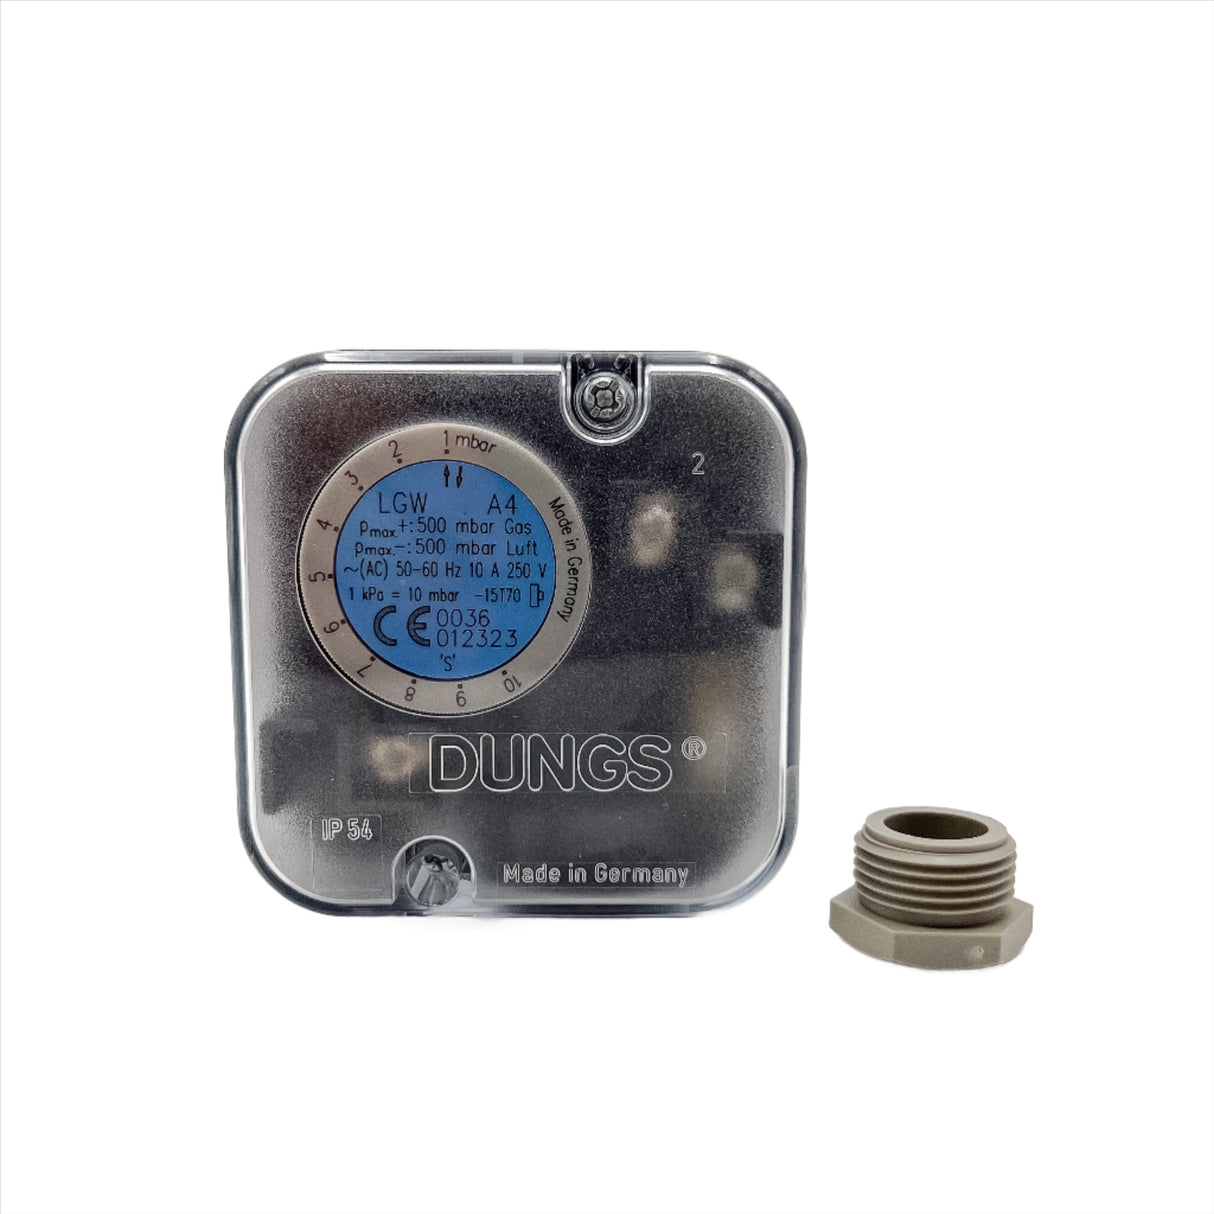 Dungs LGW150 A4 30-150 mbar Differential Air Pressure Switch